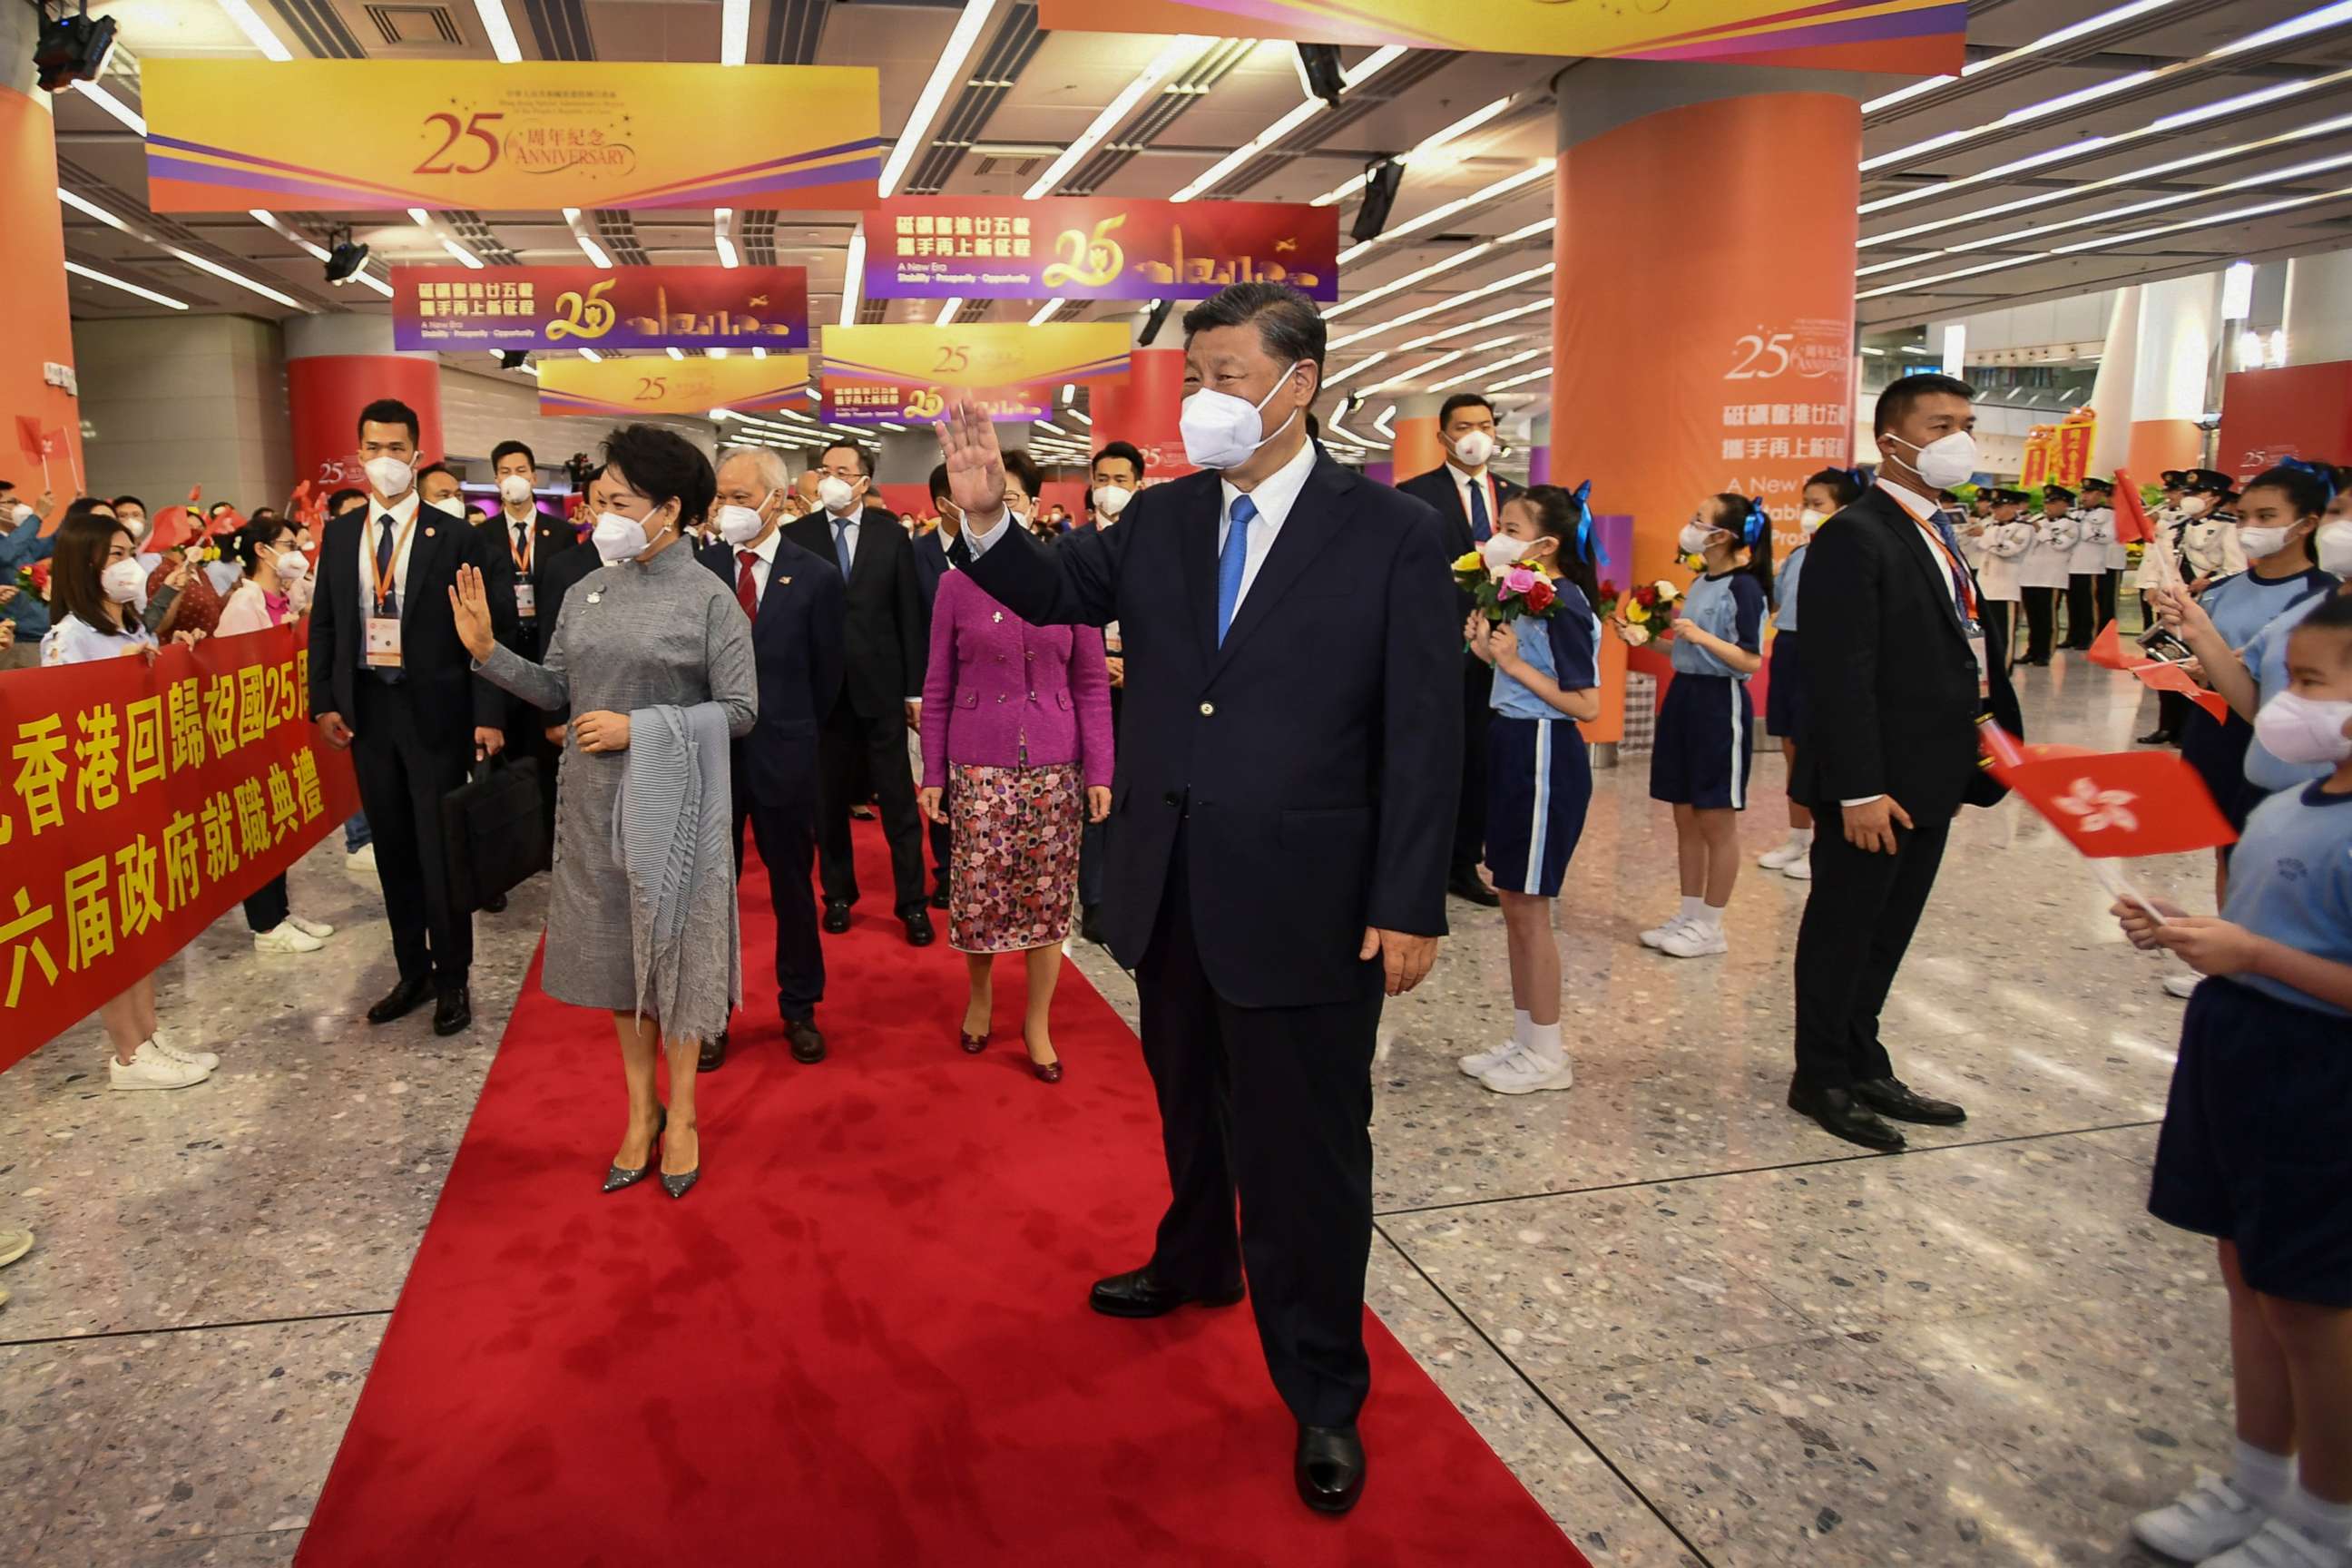 PHOTO: In this photo released by Xinhua News Agency, Chinese President Xi Jinping, center and his wife Peng Liyuan, center left, wave to welcoming crowd as they arrive to a train station in Hong Kong, Thursday, June 30, 2022.